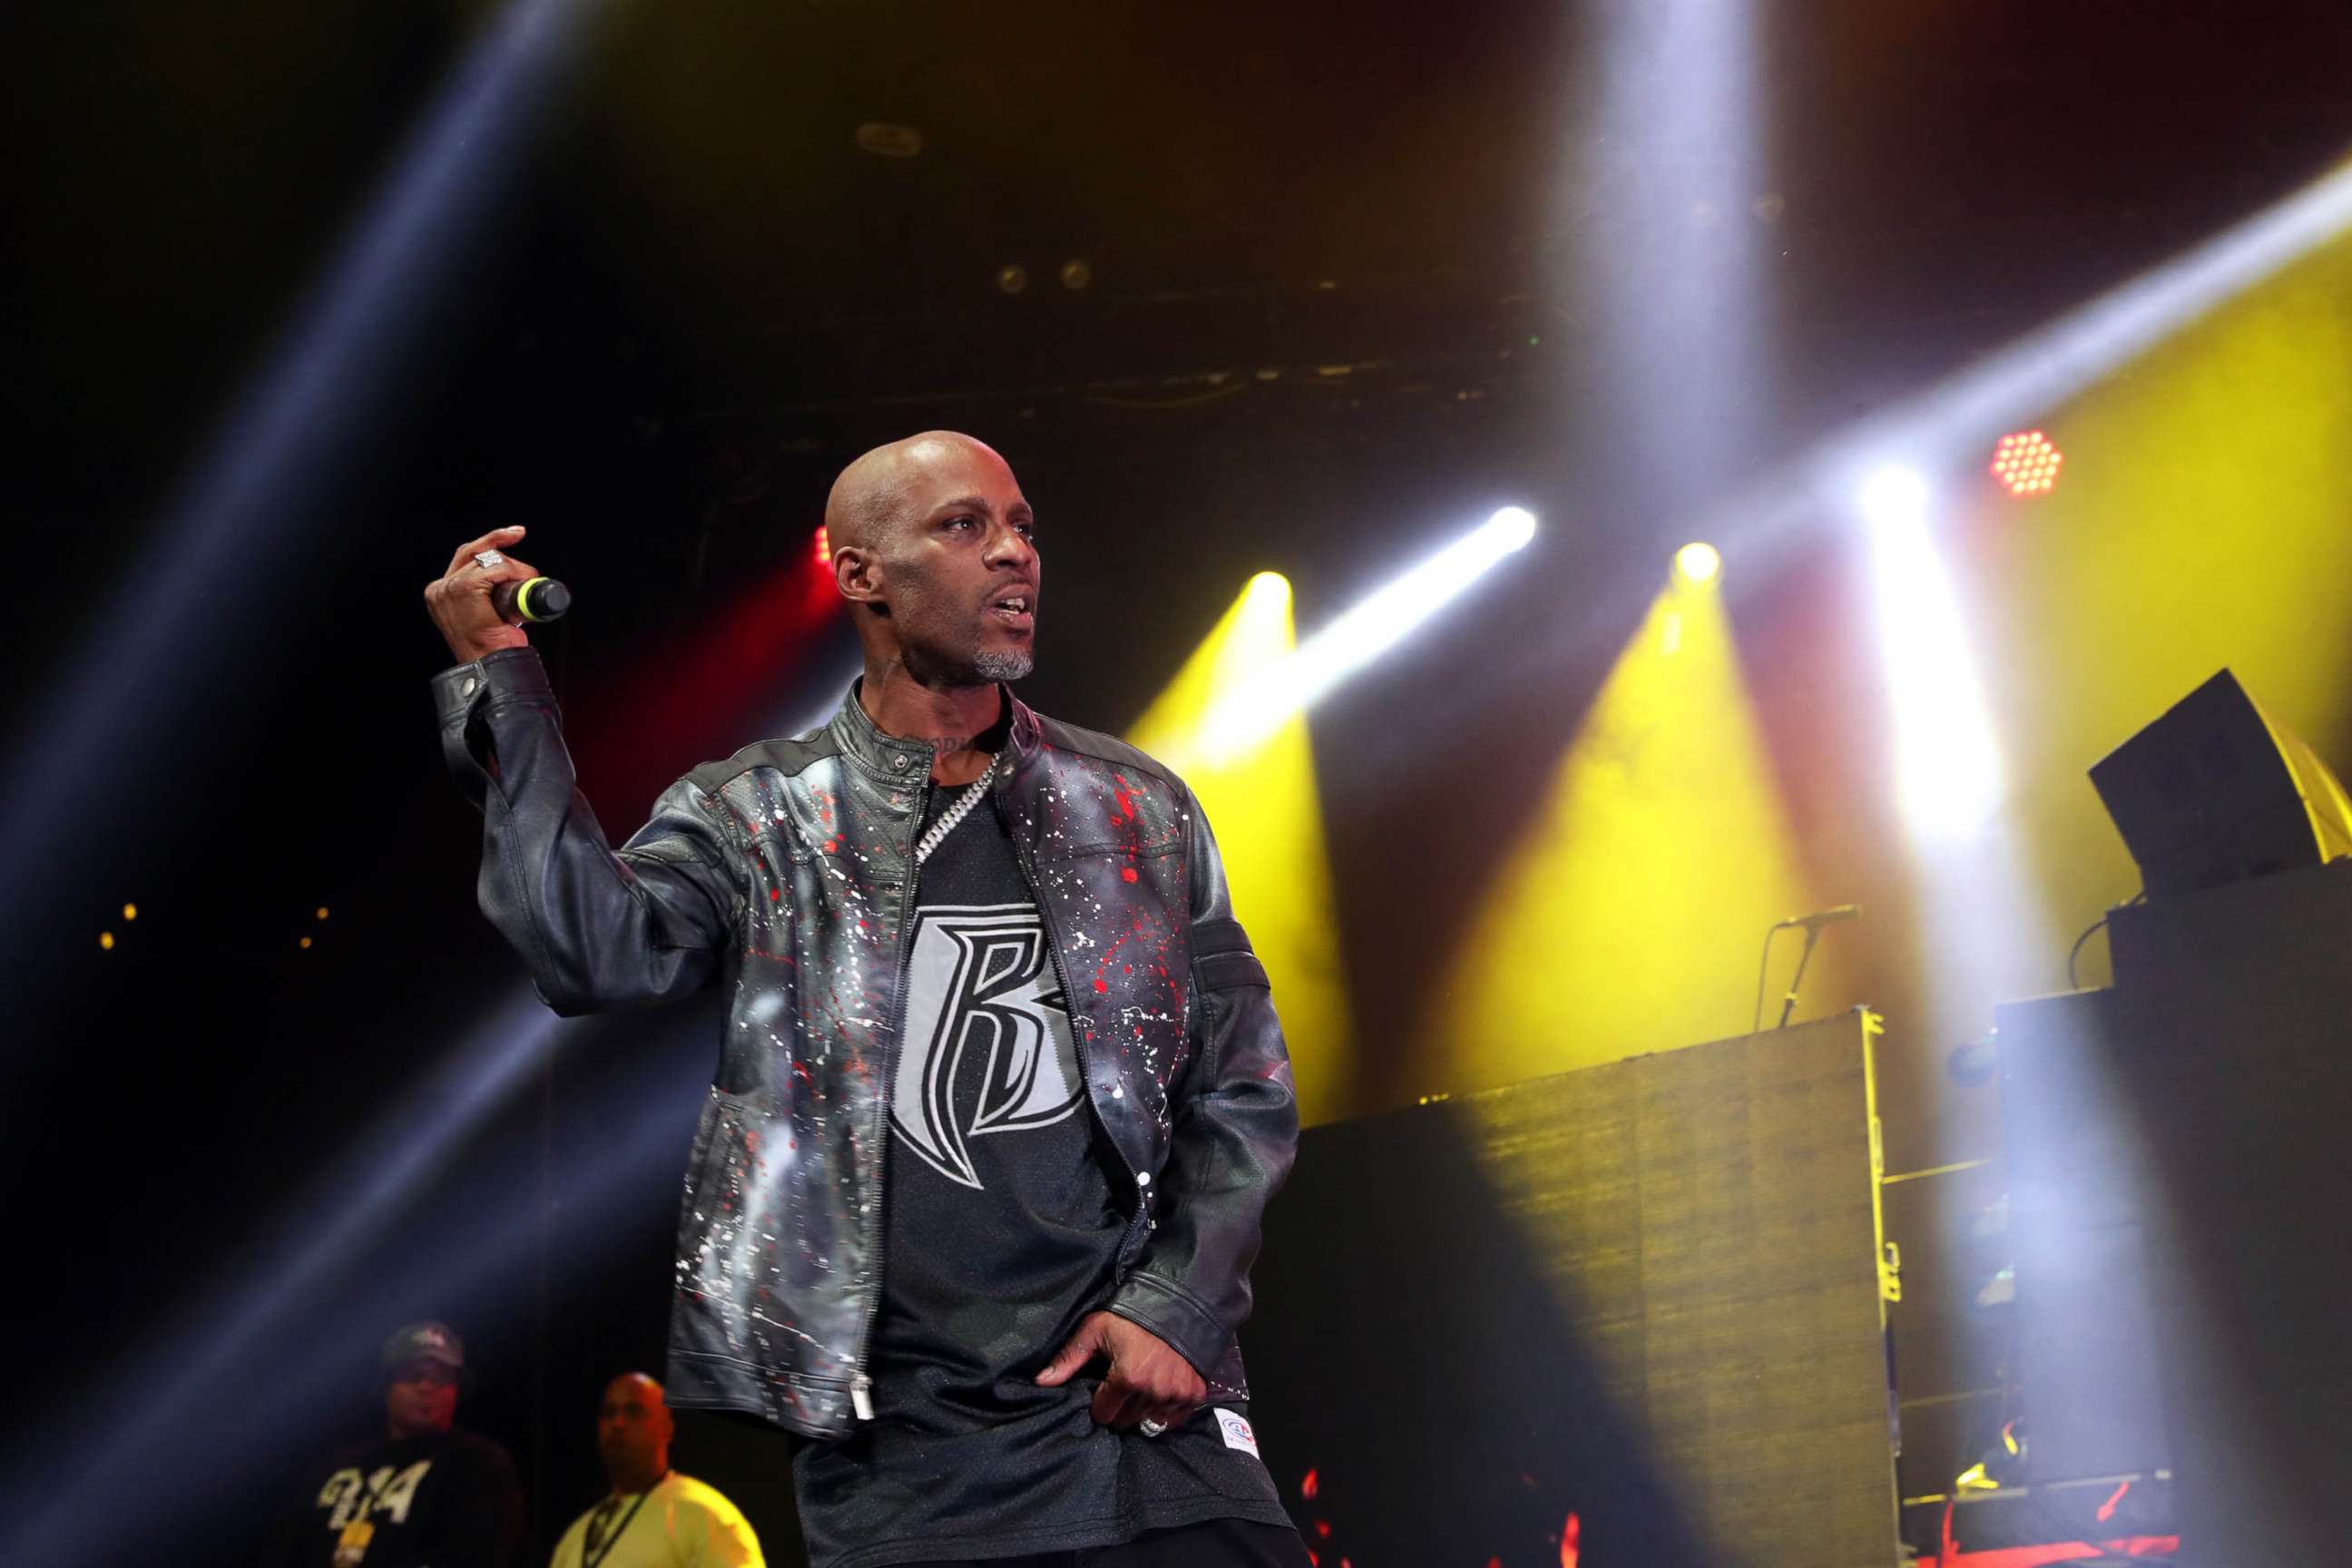 PHOTO: DMX performs during the Ruff Ryders Reunion Concert in New York, April 21, 2017.